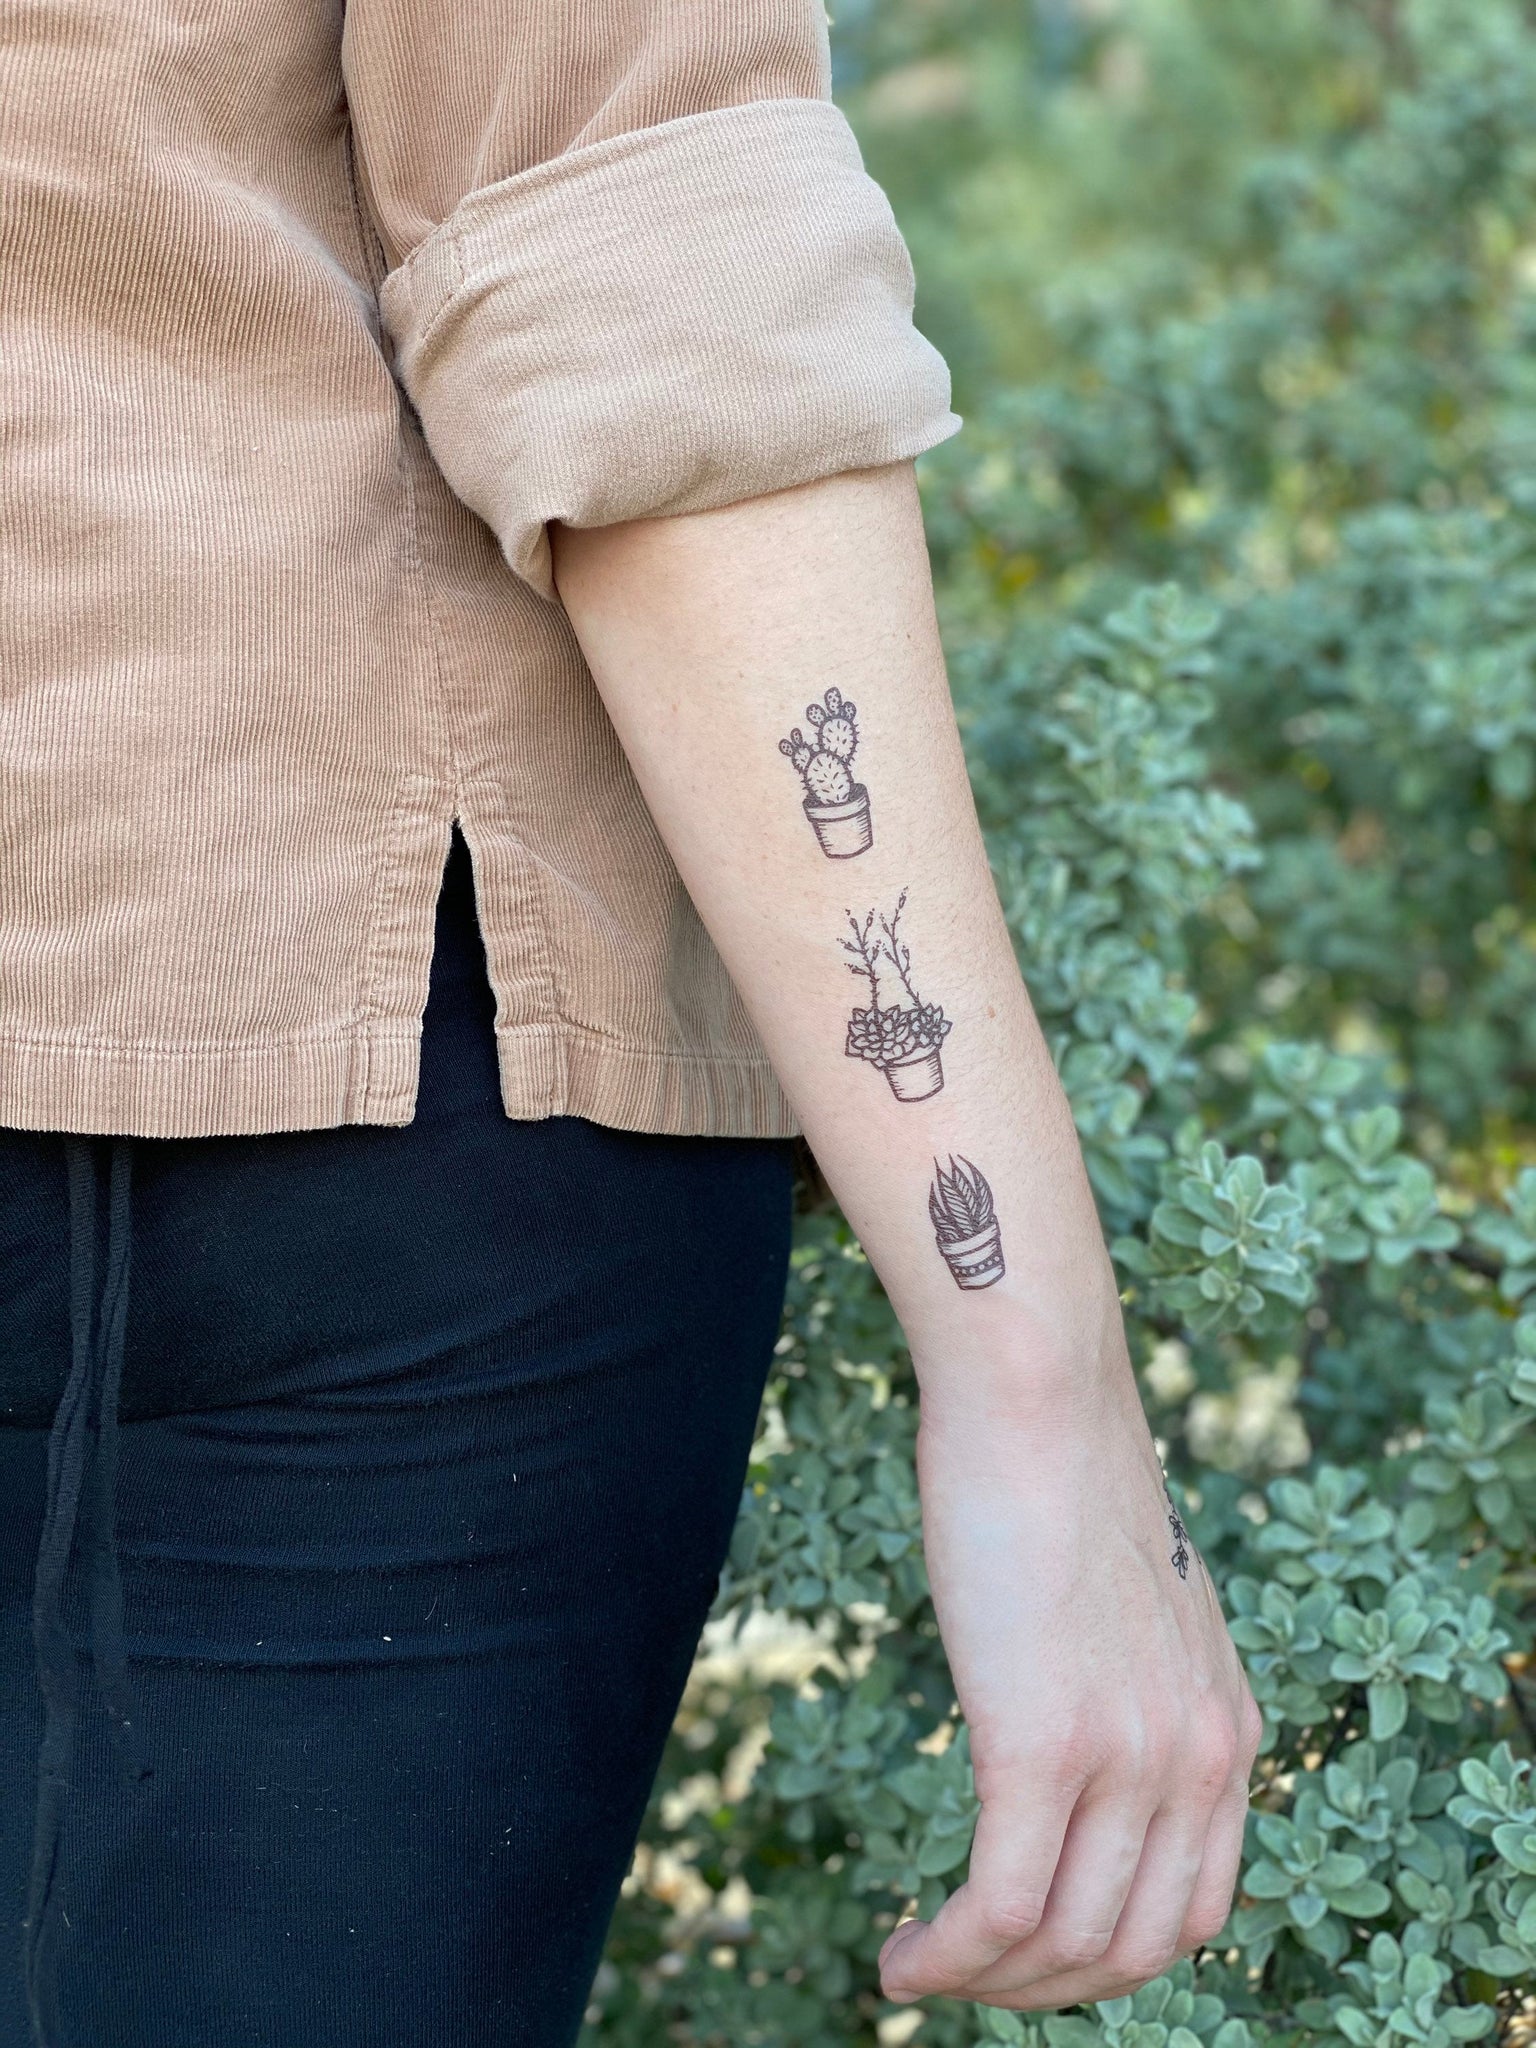 40 Stunning Nature-Inspired Tattoo Ideas For You To Get If You Love The  Outdoors & Traveling | Tree tattoo small, Nature tattoos, Tree tattoo